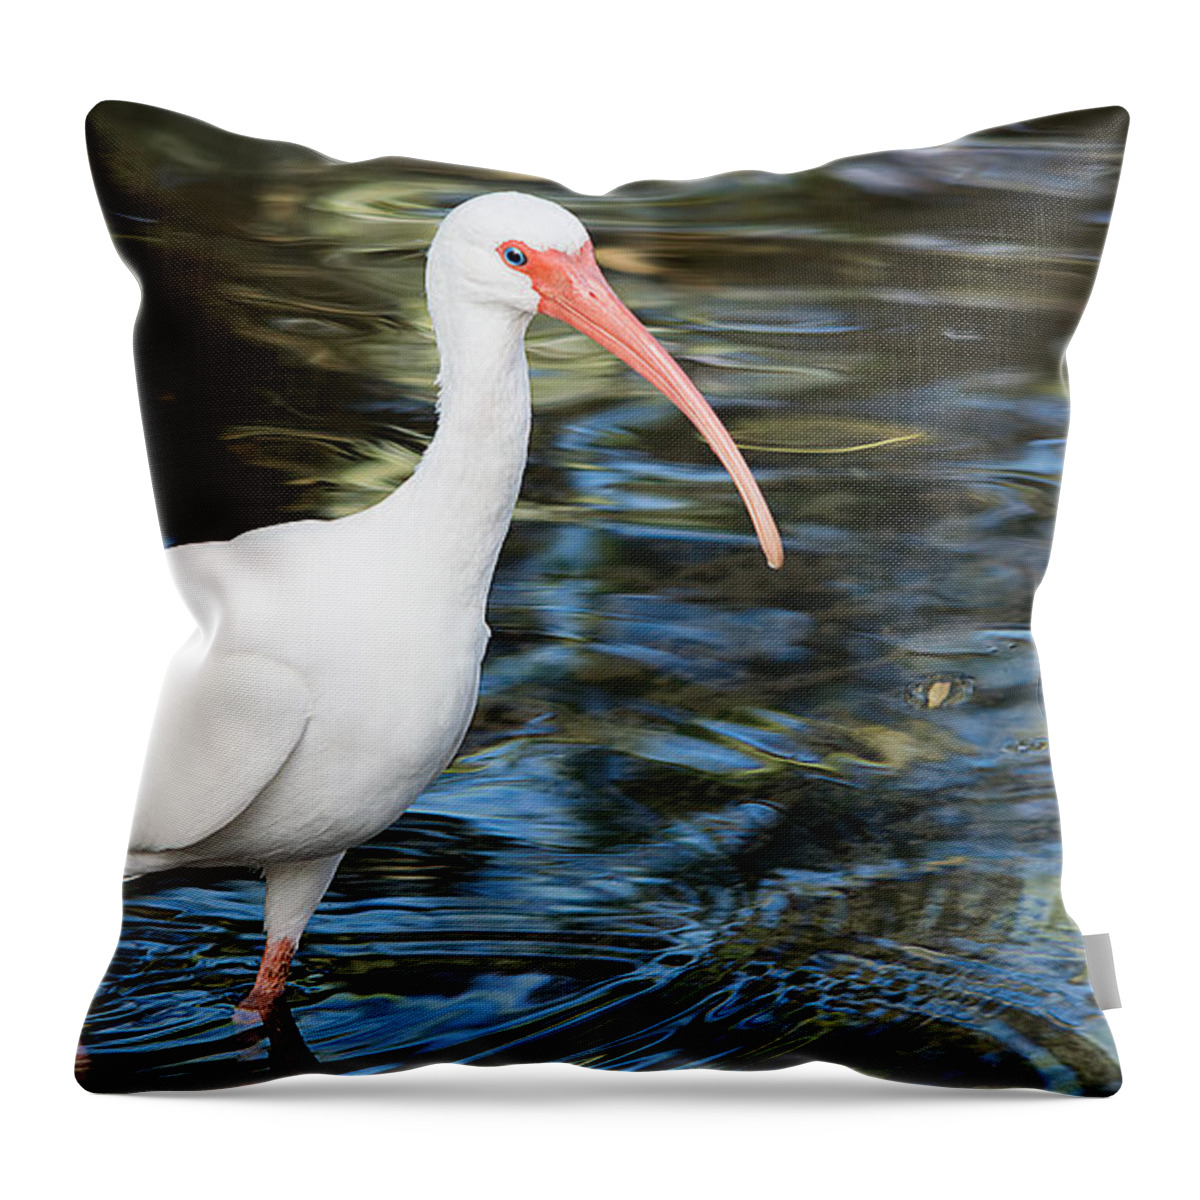 Wildlife Throw Pillow featuring the photograph Ibis In The Swamp by Kenneth Albin